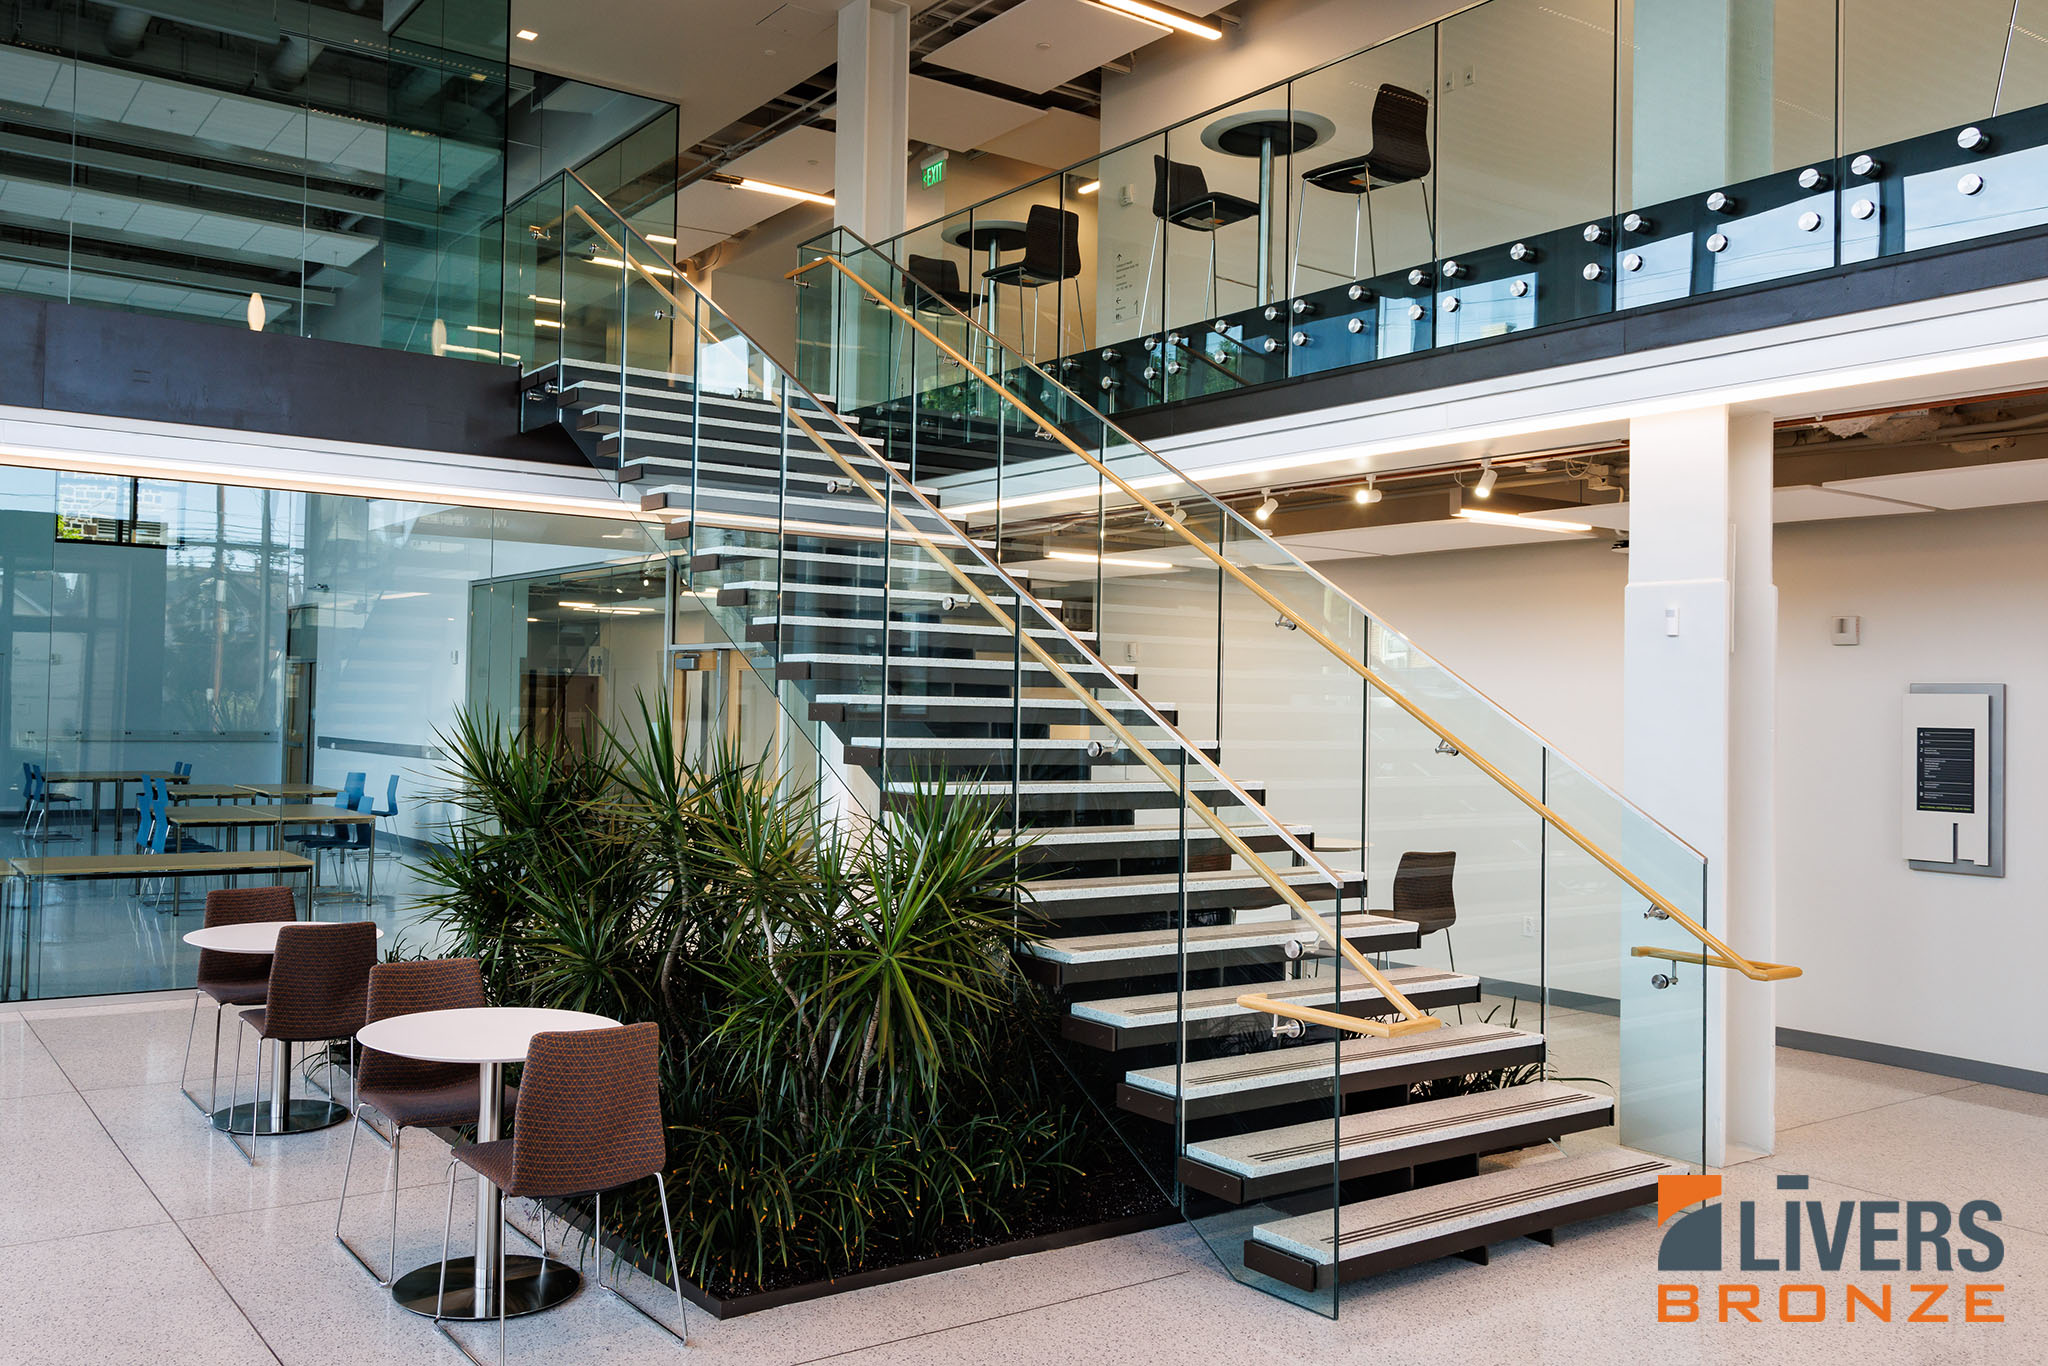 Livers Bronze Button Glass Railing System with laminated glass was installed at the lobby stairway at Lehigh University's Health, Science & Technology Building and is Made in the USA.